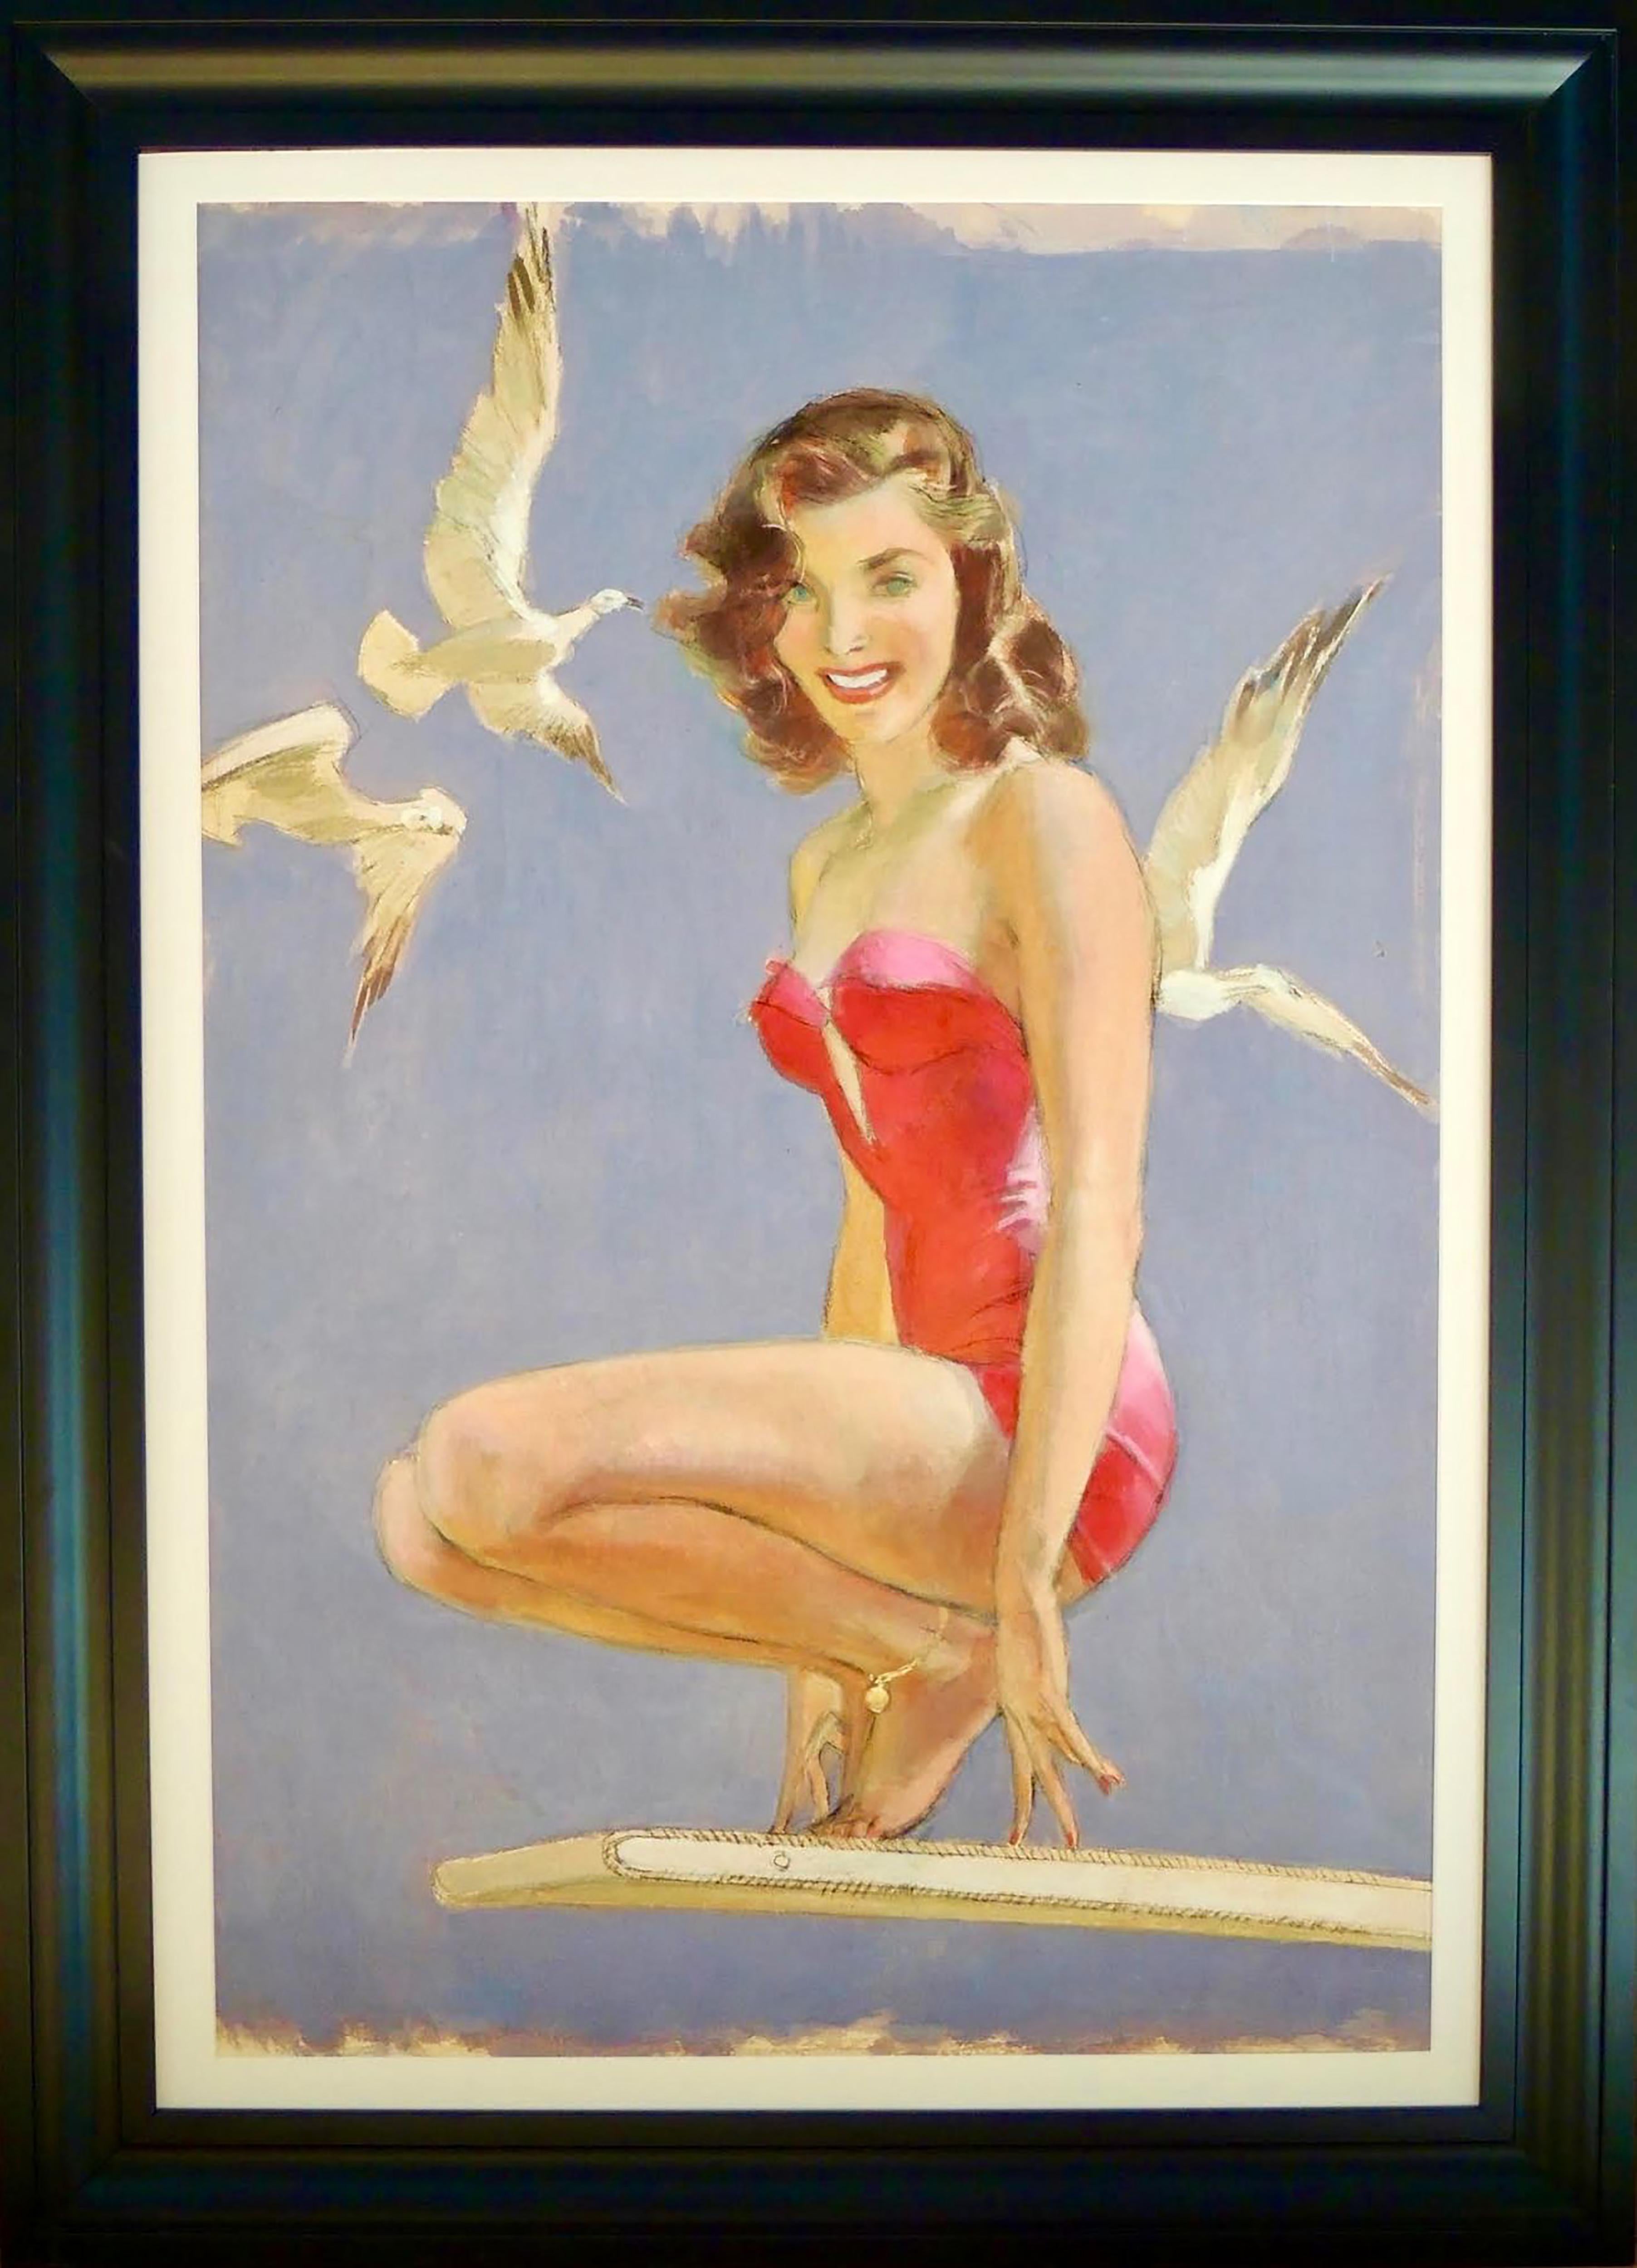 Woman in Red Swimsuit Perched on Diving Board, Three White Doves Around Her - Art by John Lagatta